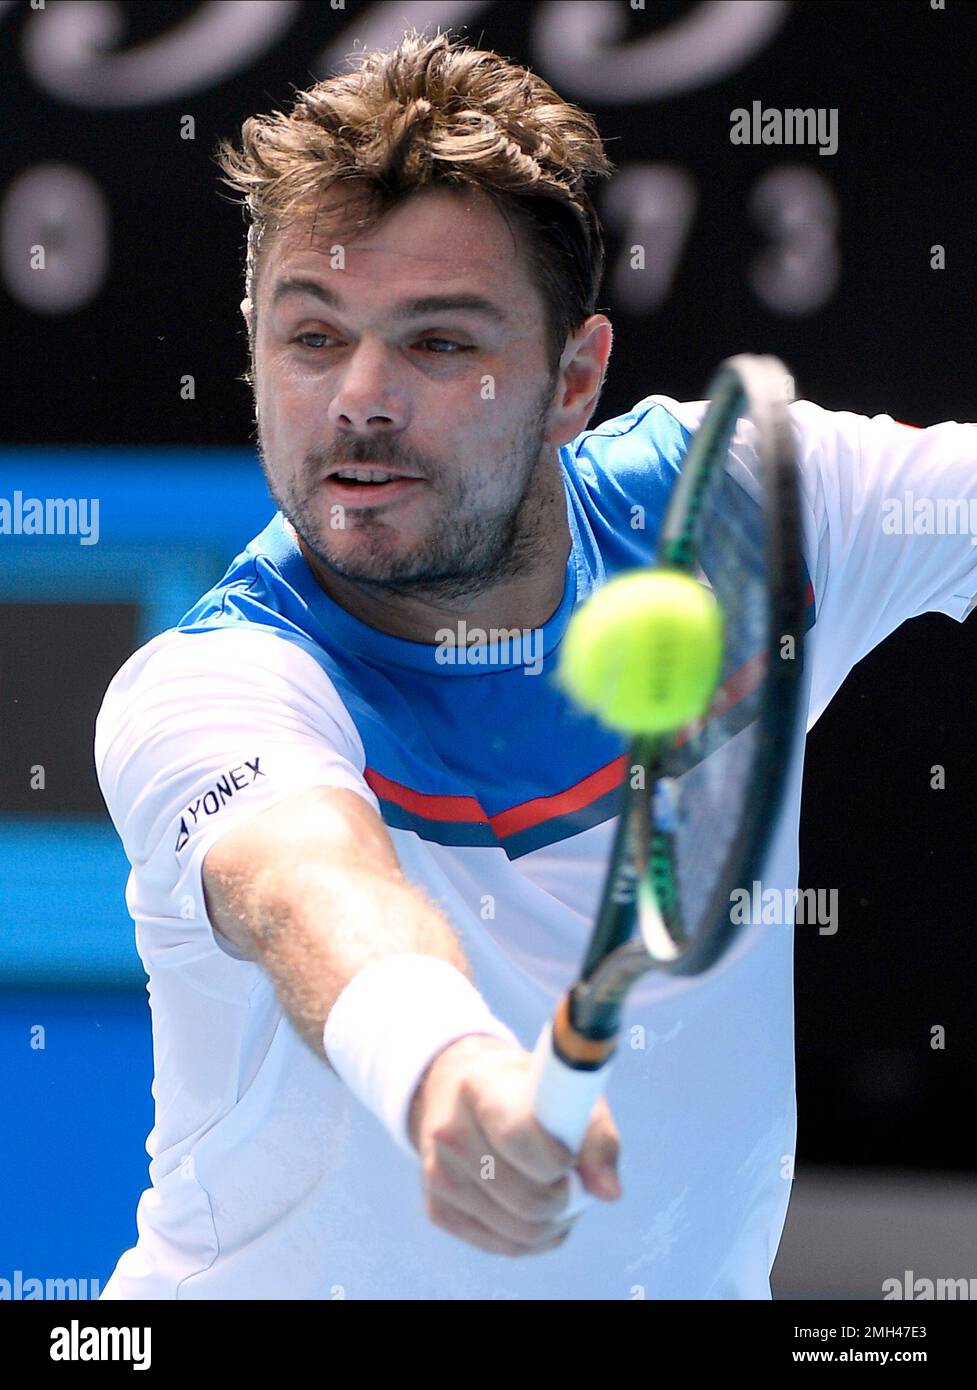 Switzerland's Stan Wawrinka makes a backhand return to Russia's Daniil  Medvedev during their fourth round singles match at the Australian Open  tennis championship in Melbourne, Australia, Monday, Jan. 27, 2020. (AP  Photo/Andy